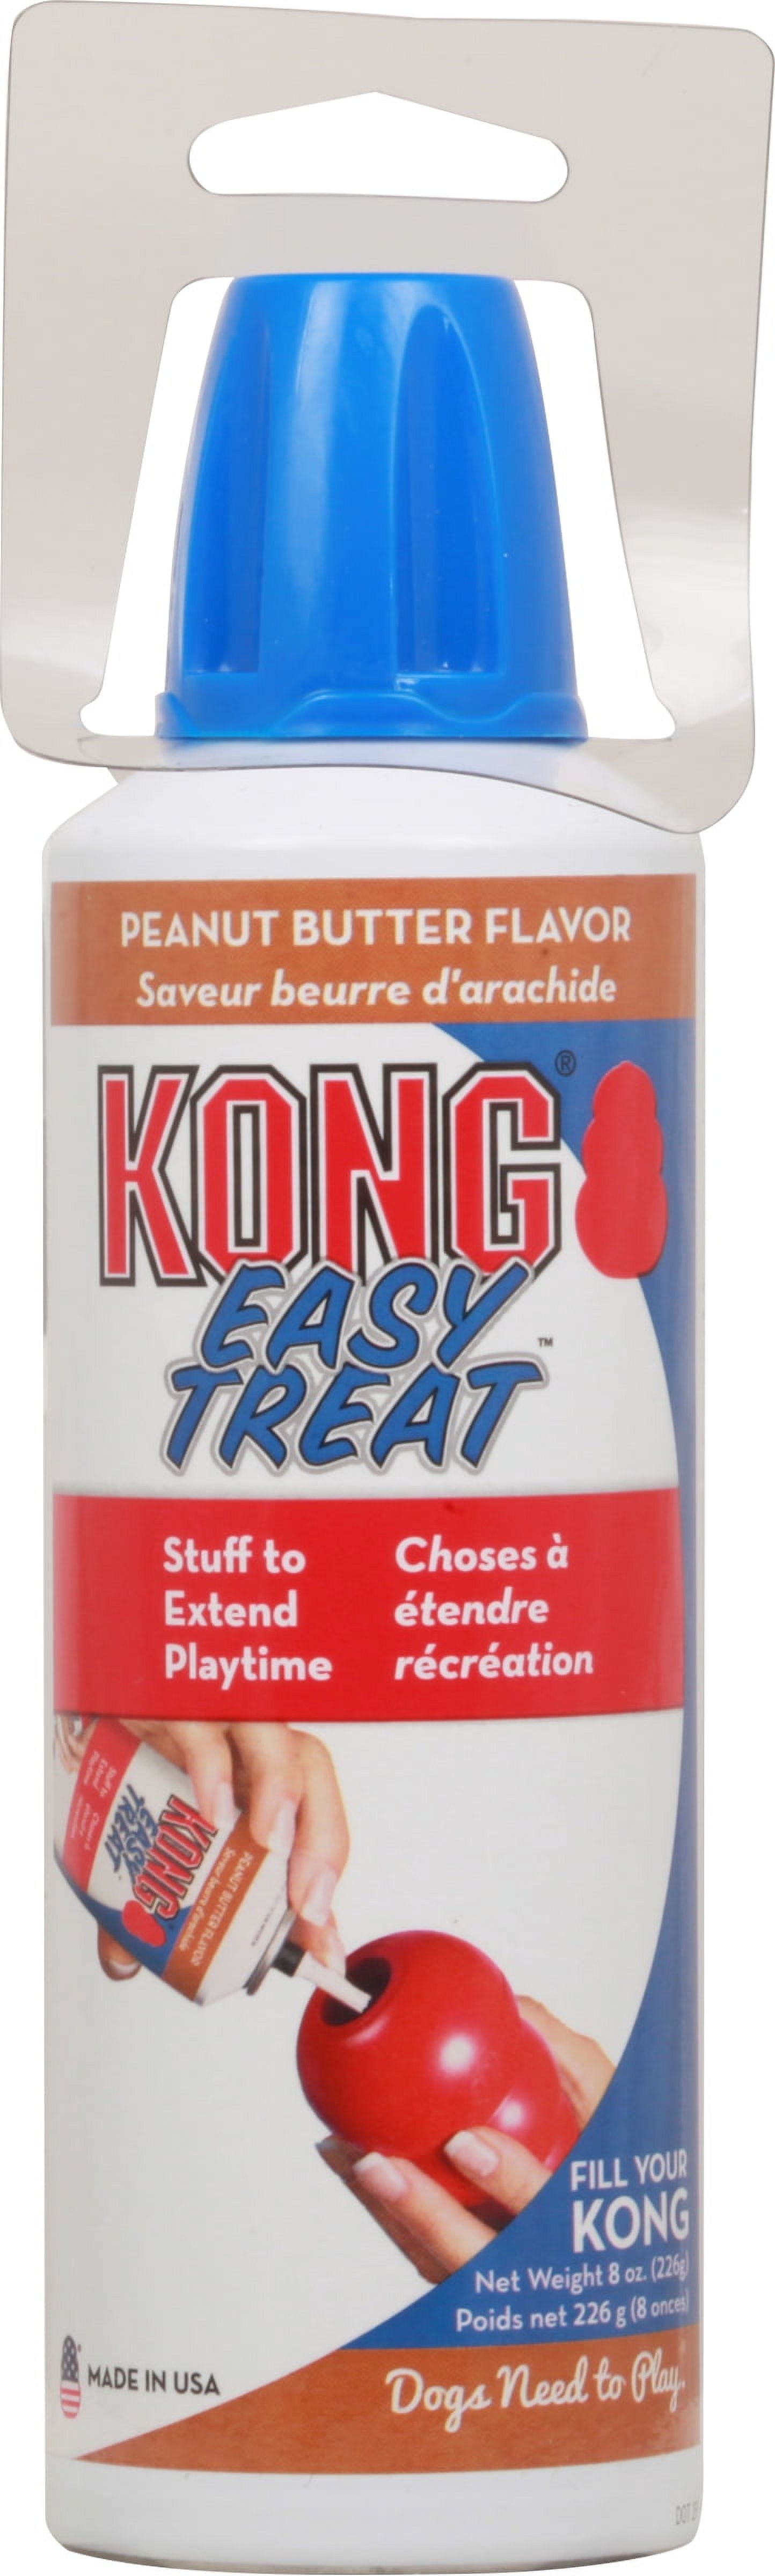  Kong Easy Treat Filler - Training Treats for Dogs, 8 Oz (Pack  of 2) with Recipe Card (Liver Paste Recipe) by Raptor Bros : Pet Supplies